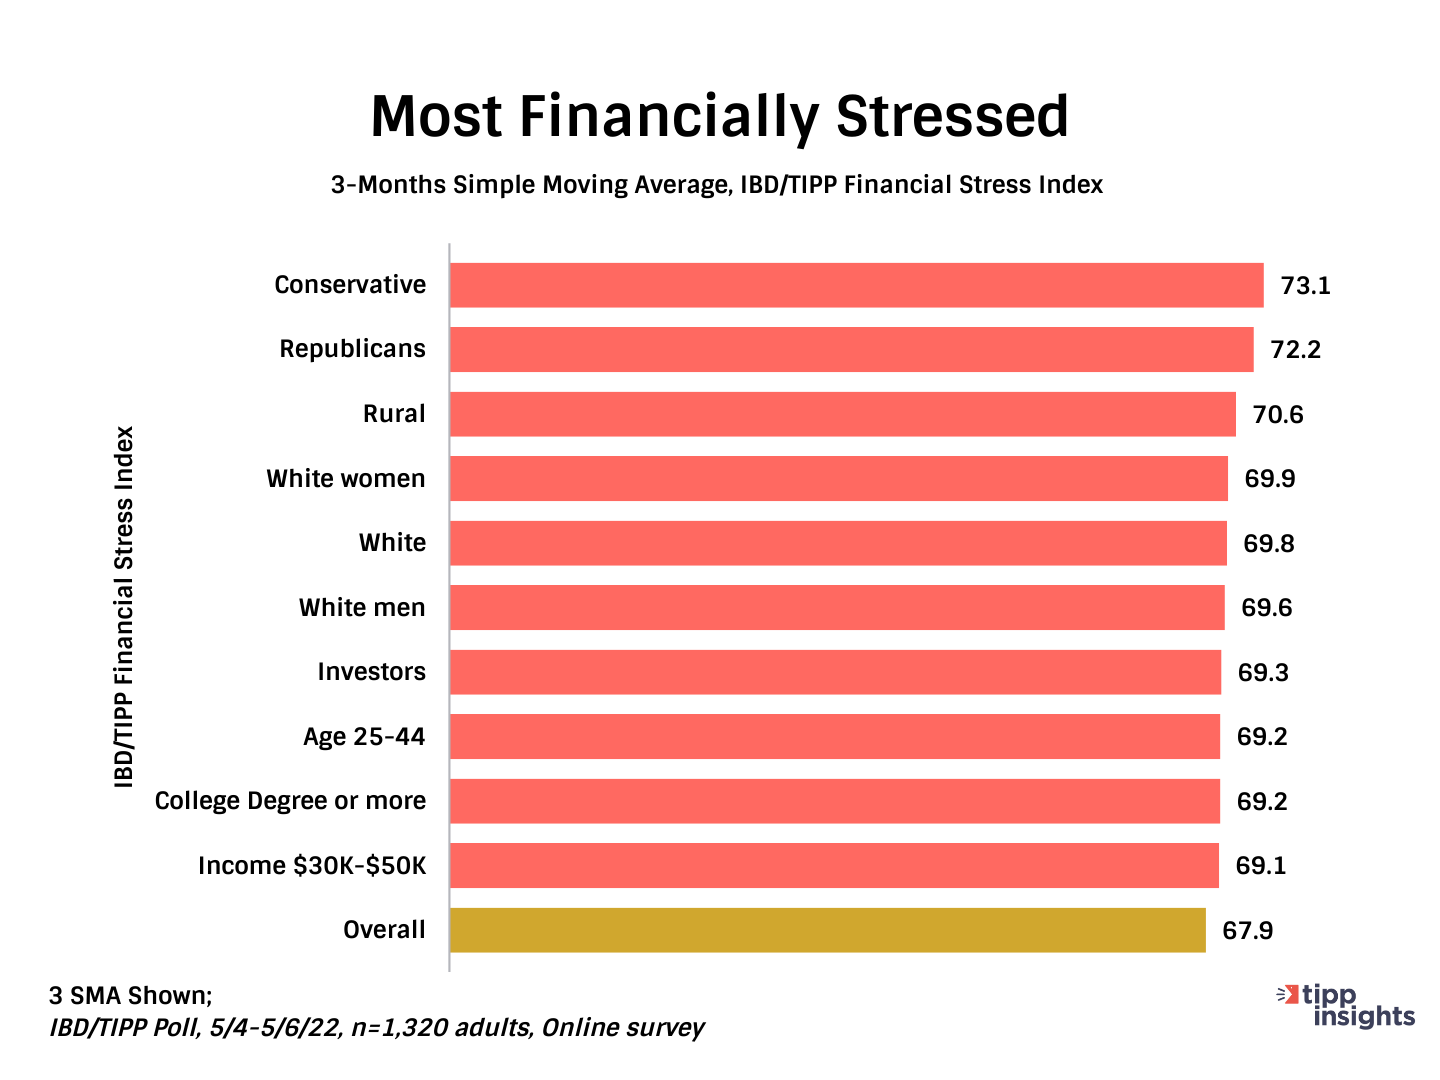 IBD/TIPP Poll Results: Most Financially stressed demographics